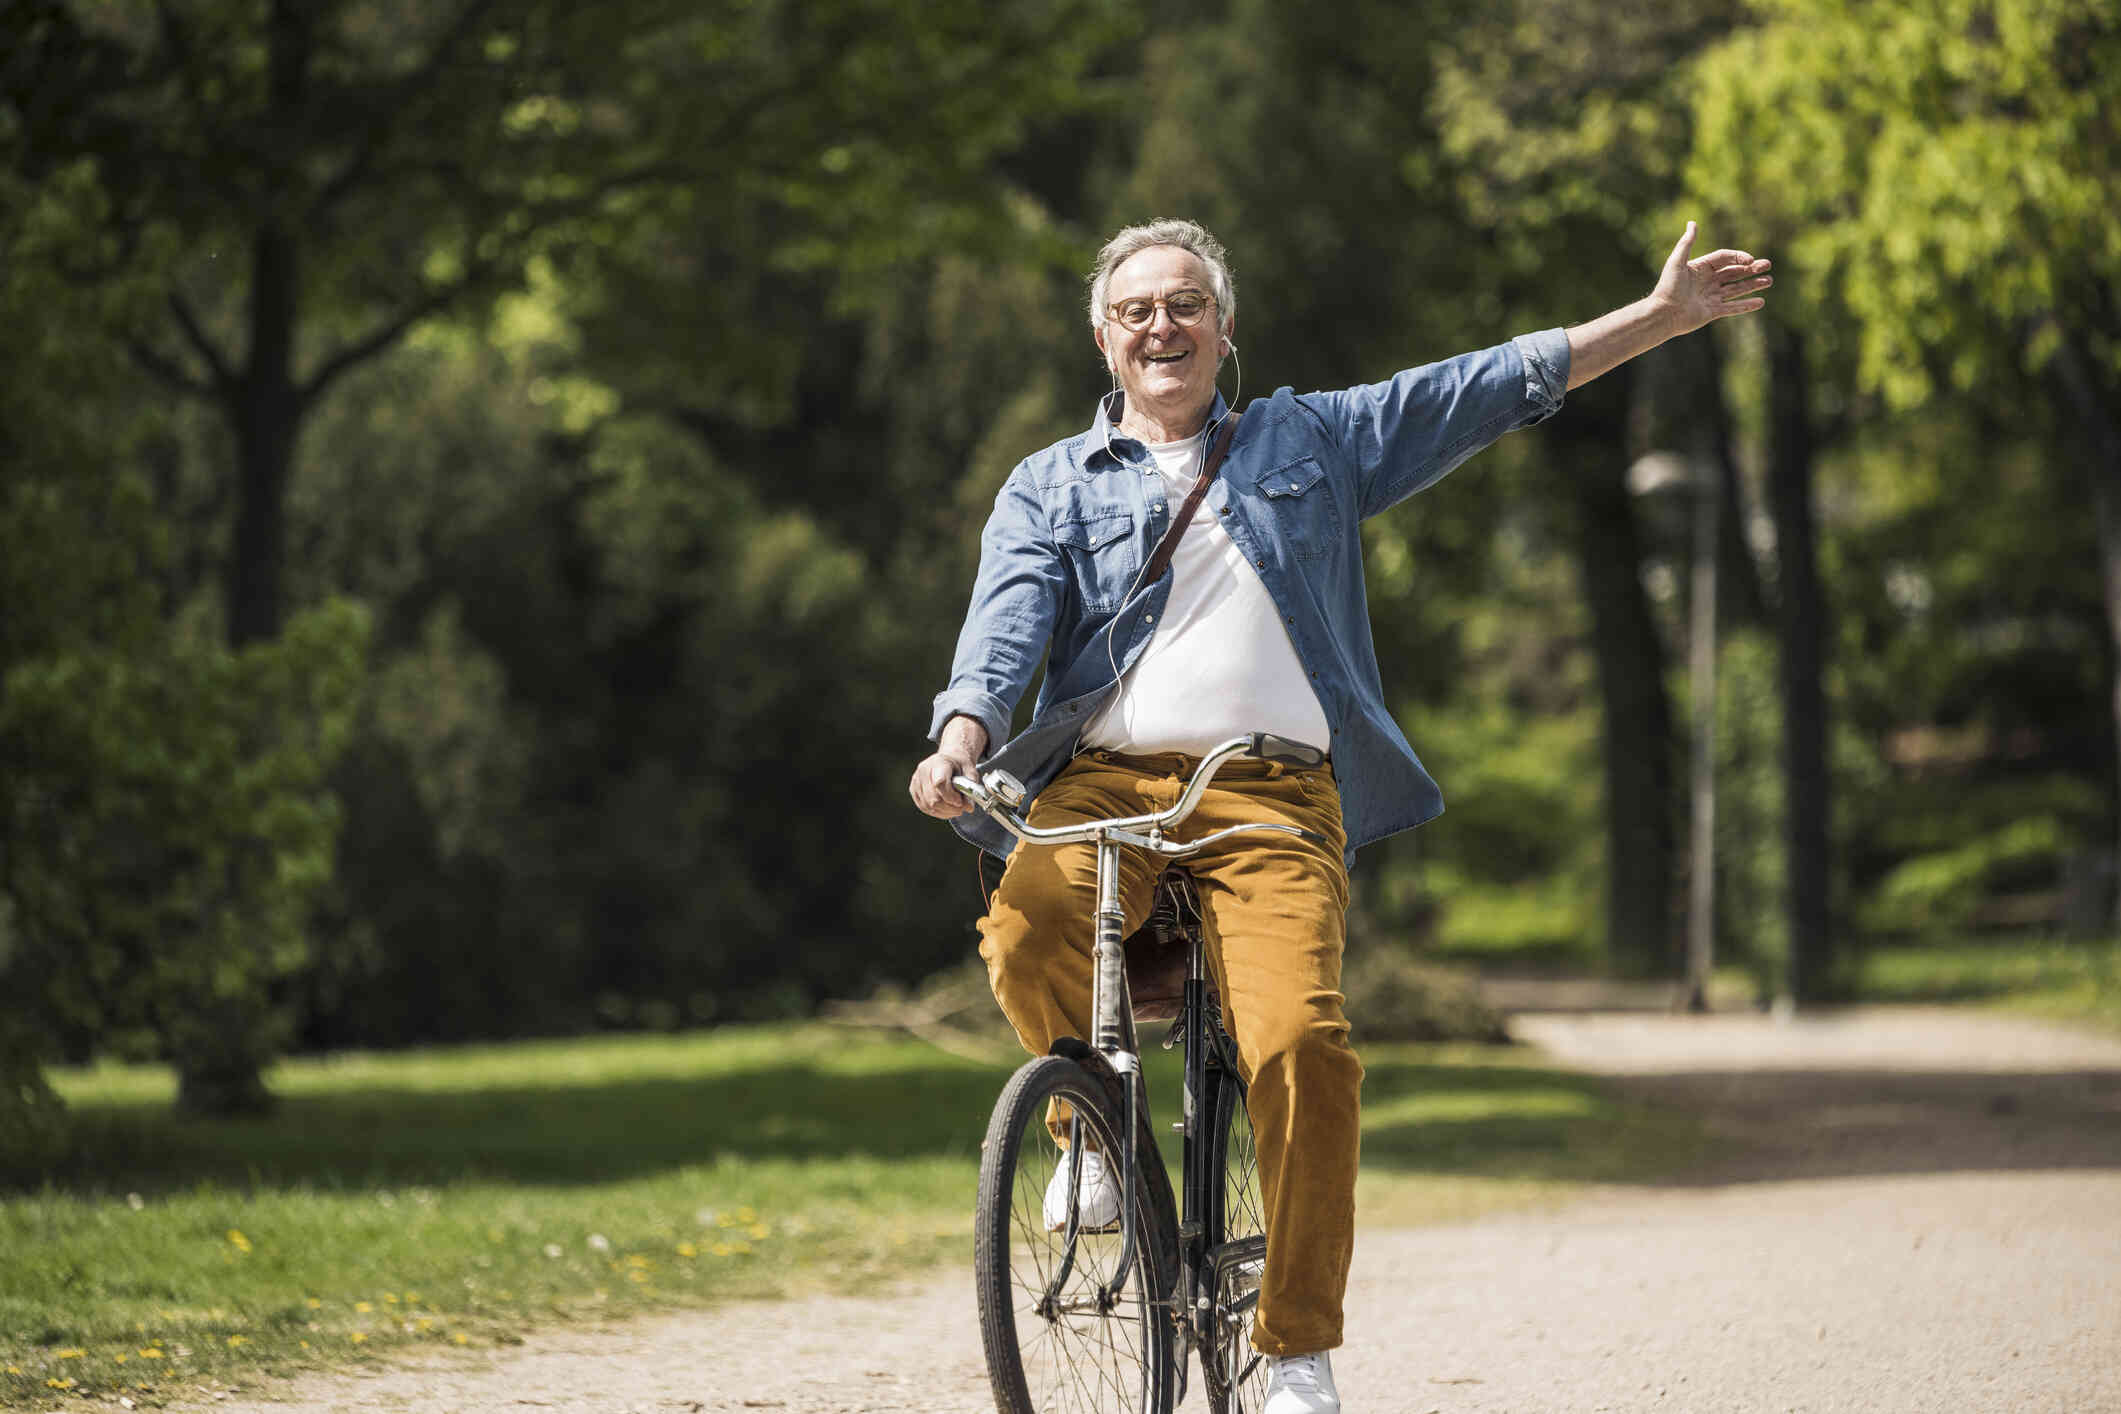 A middle aged man rides his bicycle with excitement while outside on a sunny day.